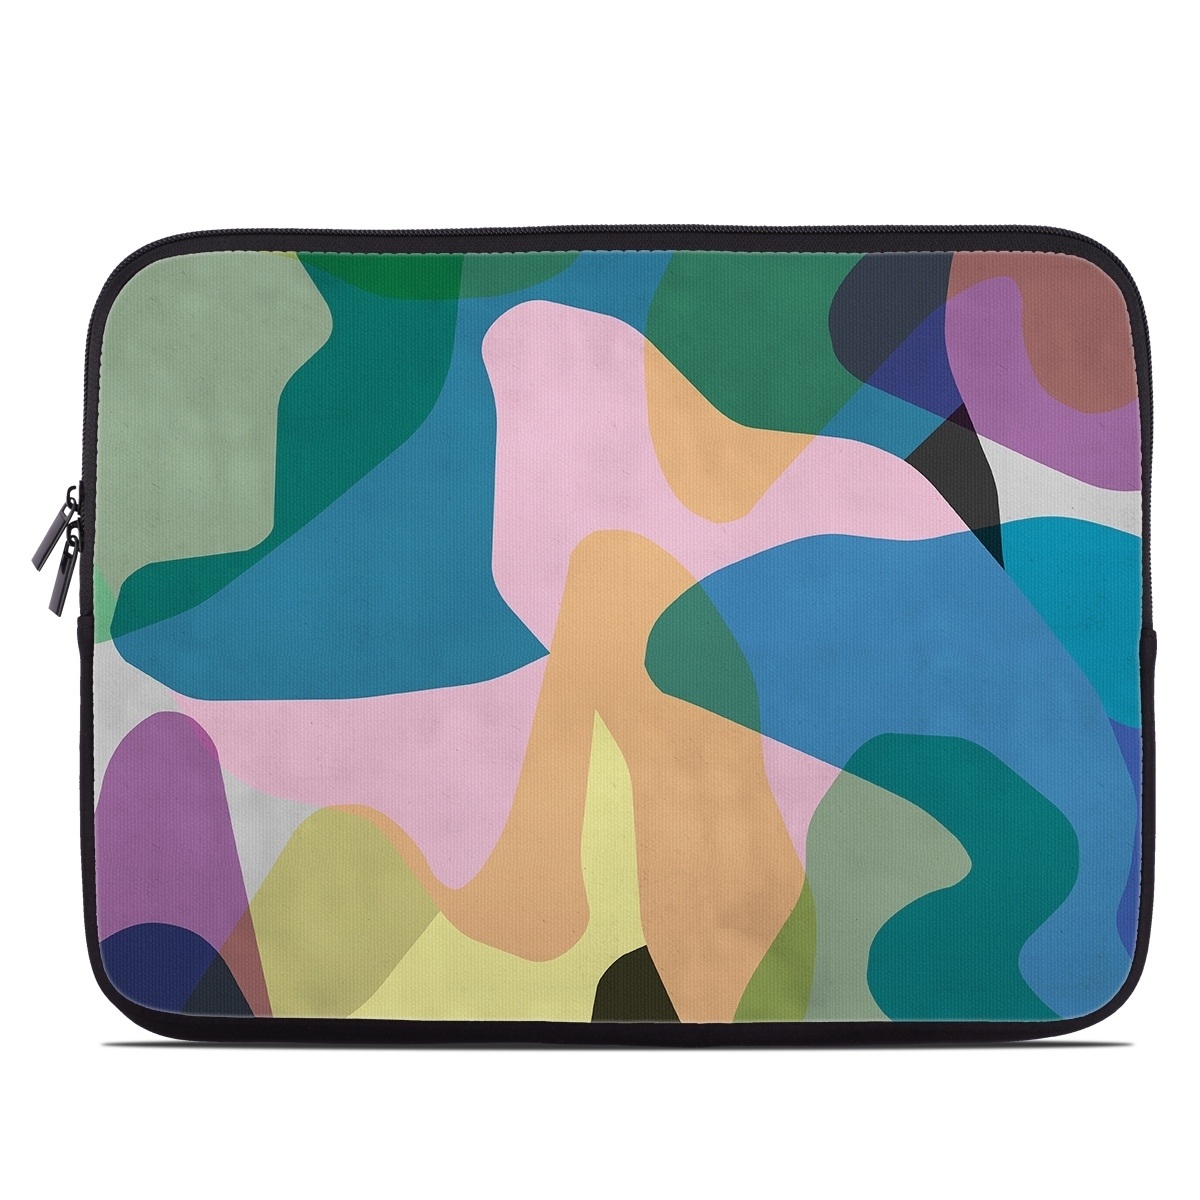 Laptop Sleeve - Abstract Camo (Image 1)